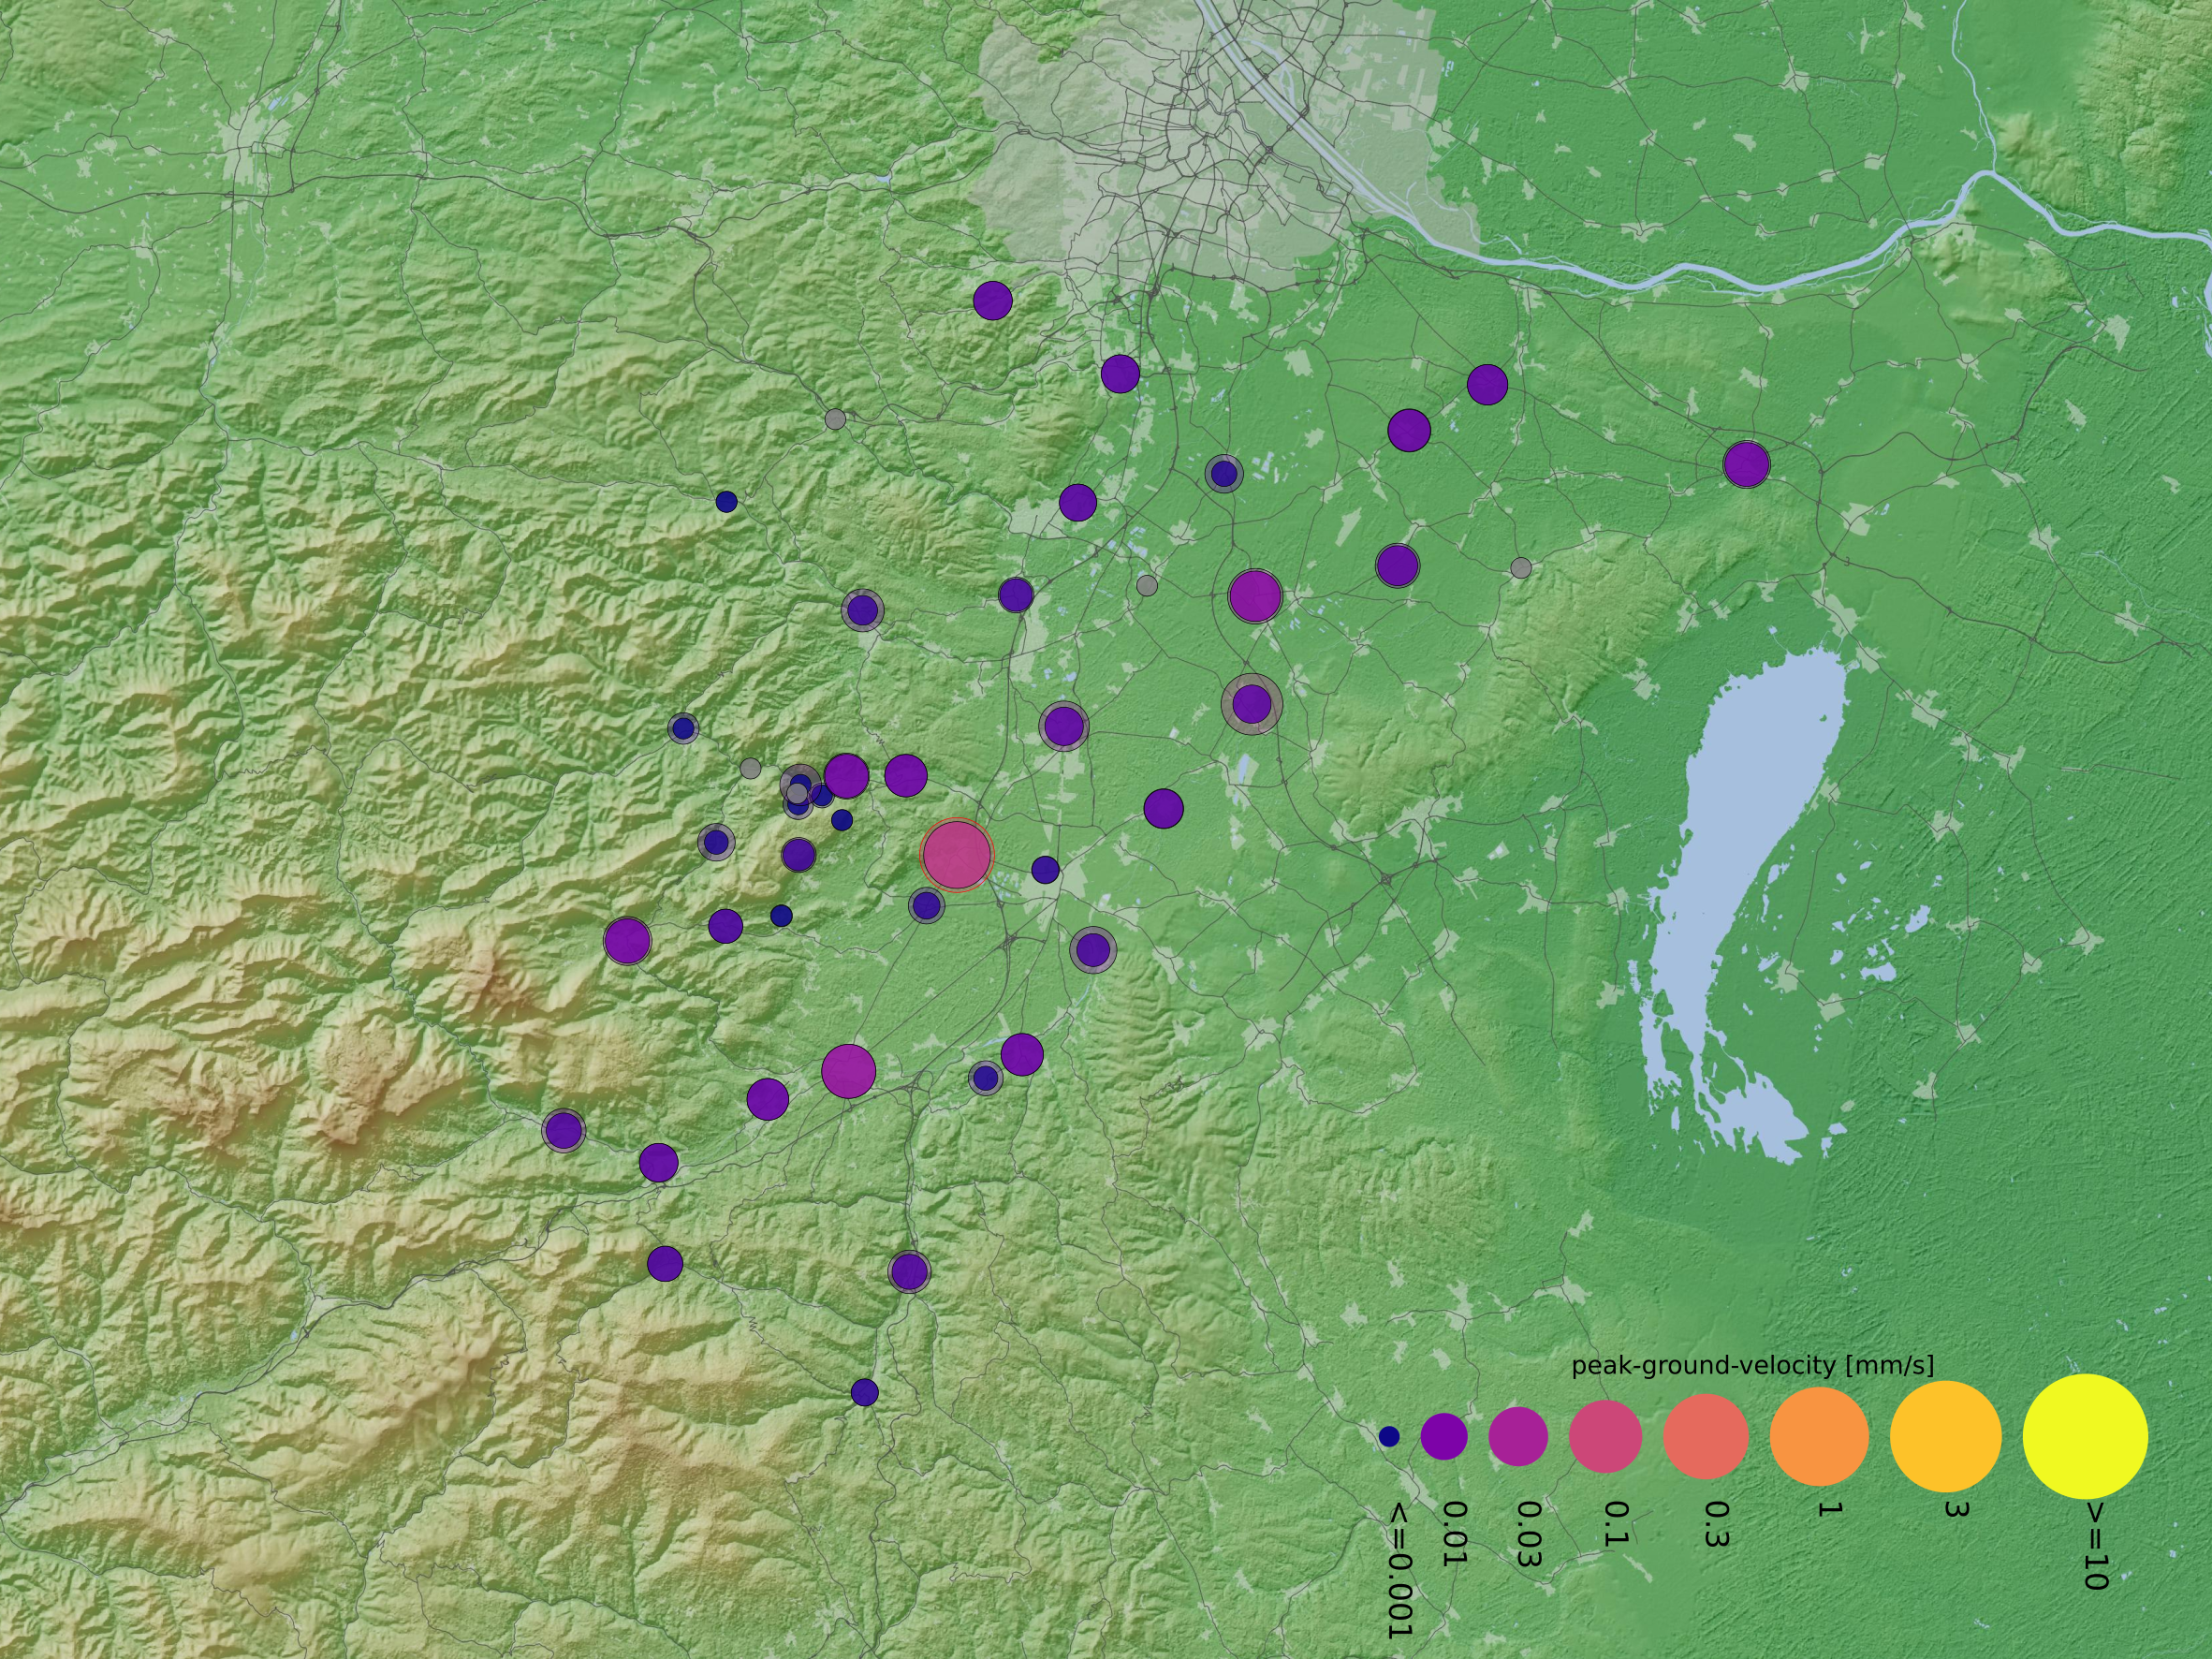 Map showing the region of the southern Viennese basin with circular markers showing the peak ground velocity of the stations of the MSS network.